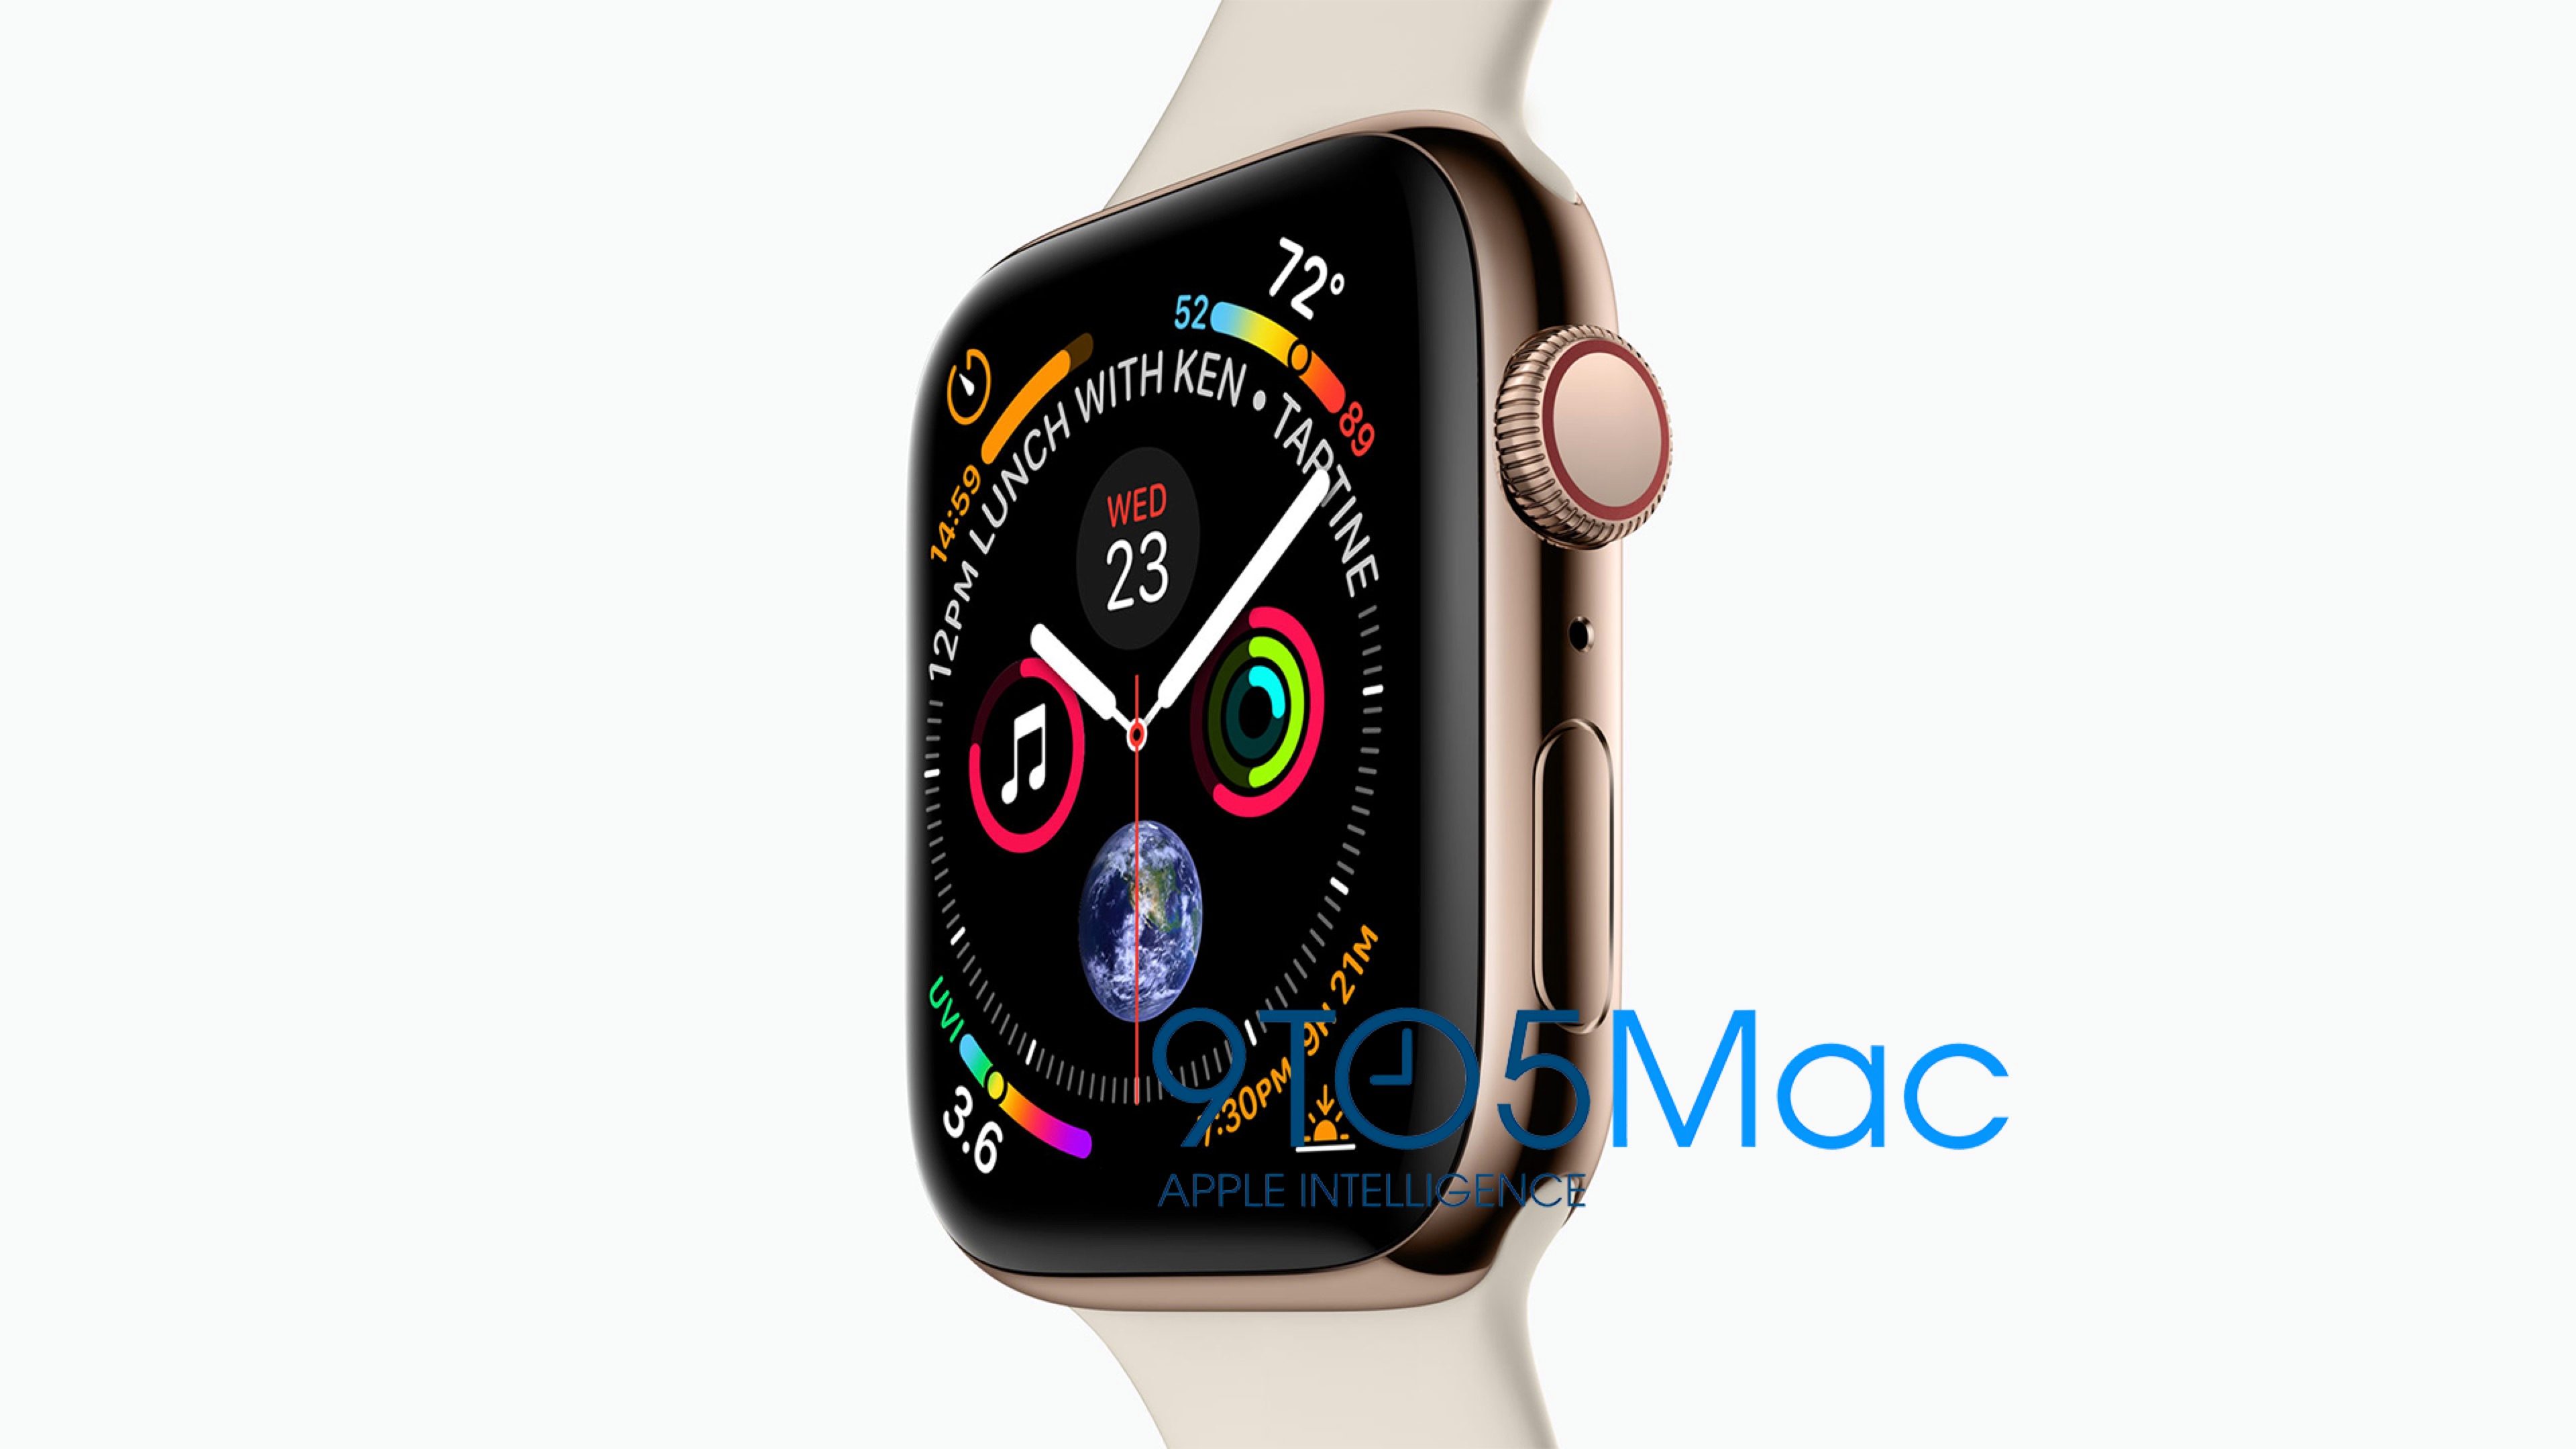 Apple Watch Series 4 leak reveals exciting new features